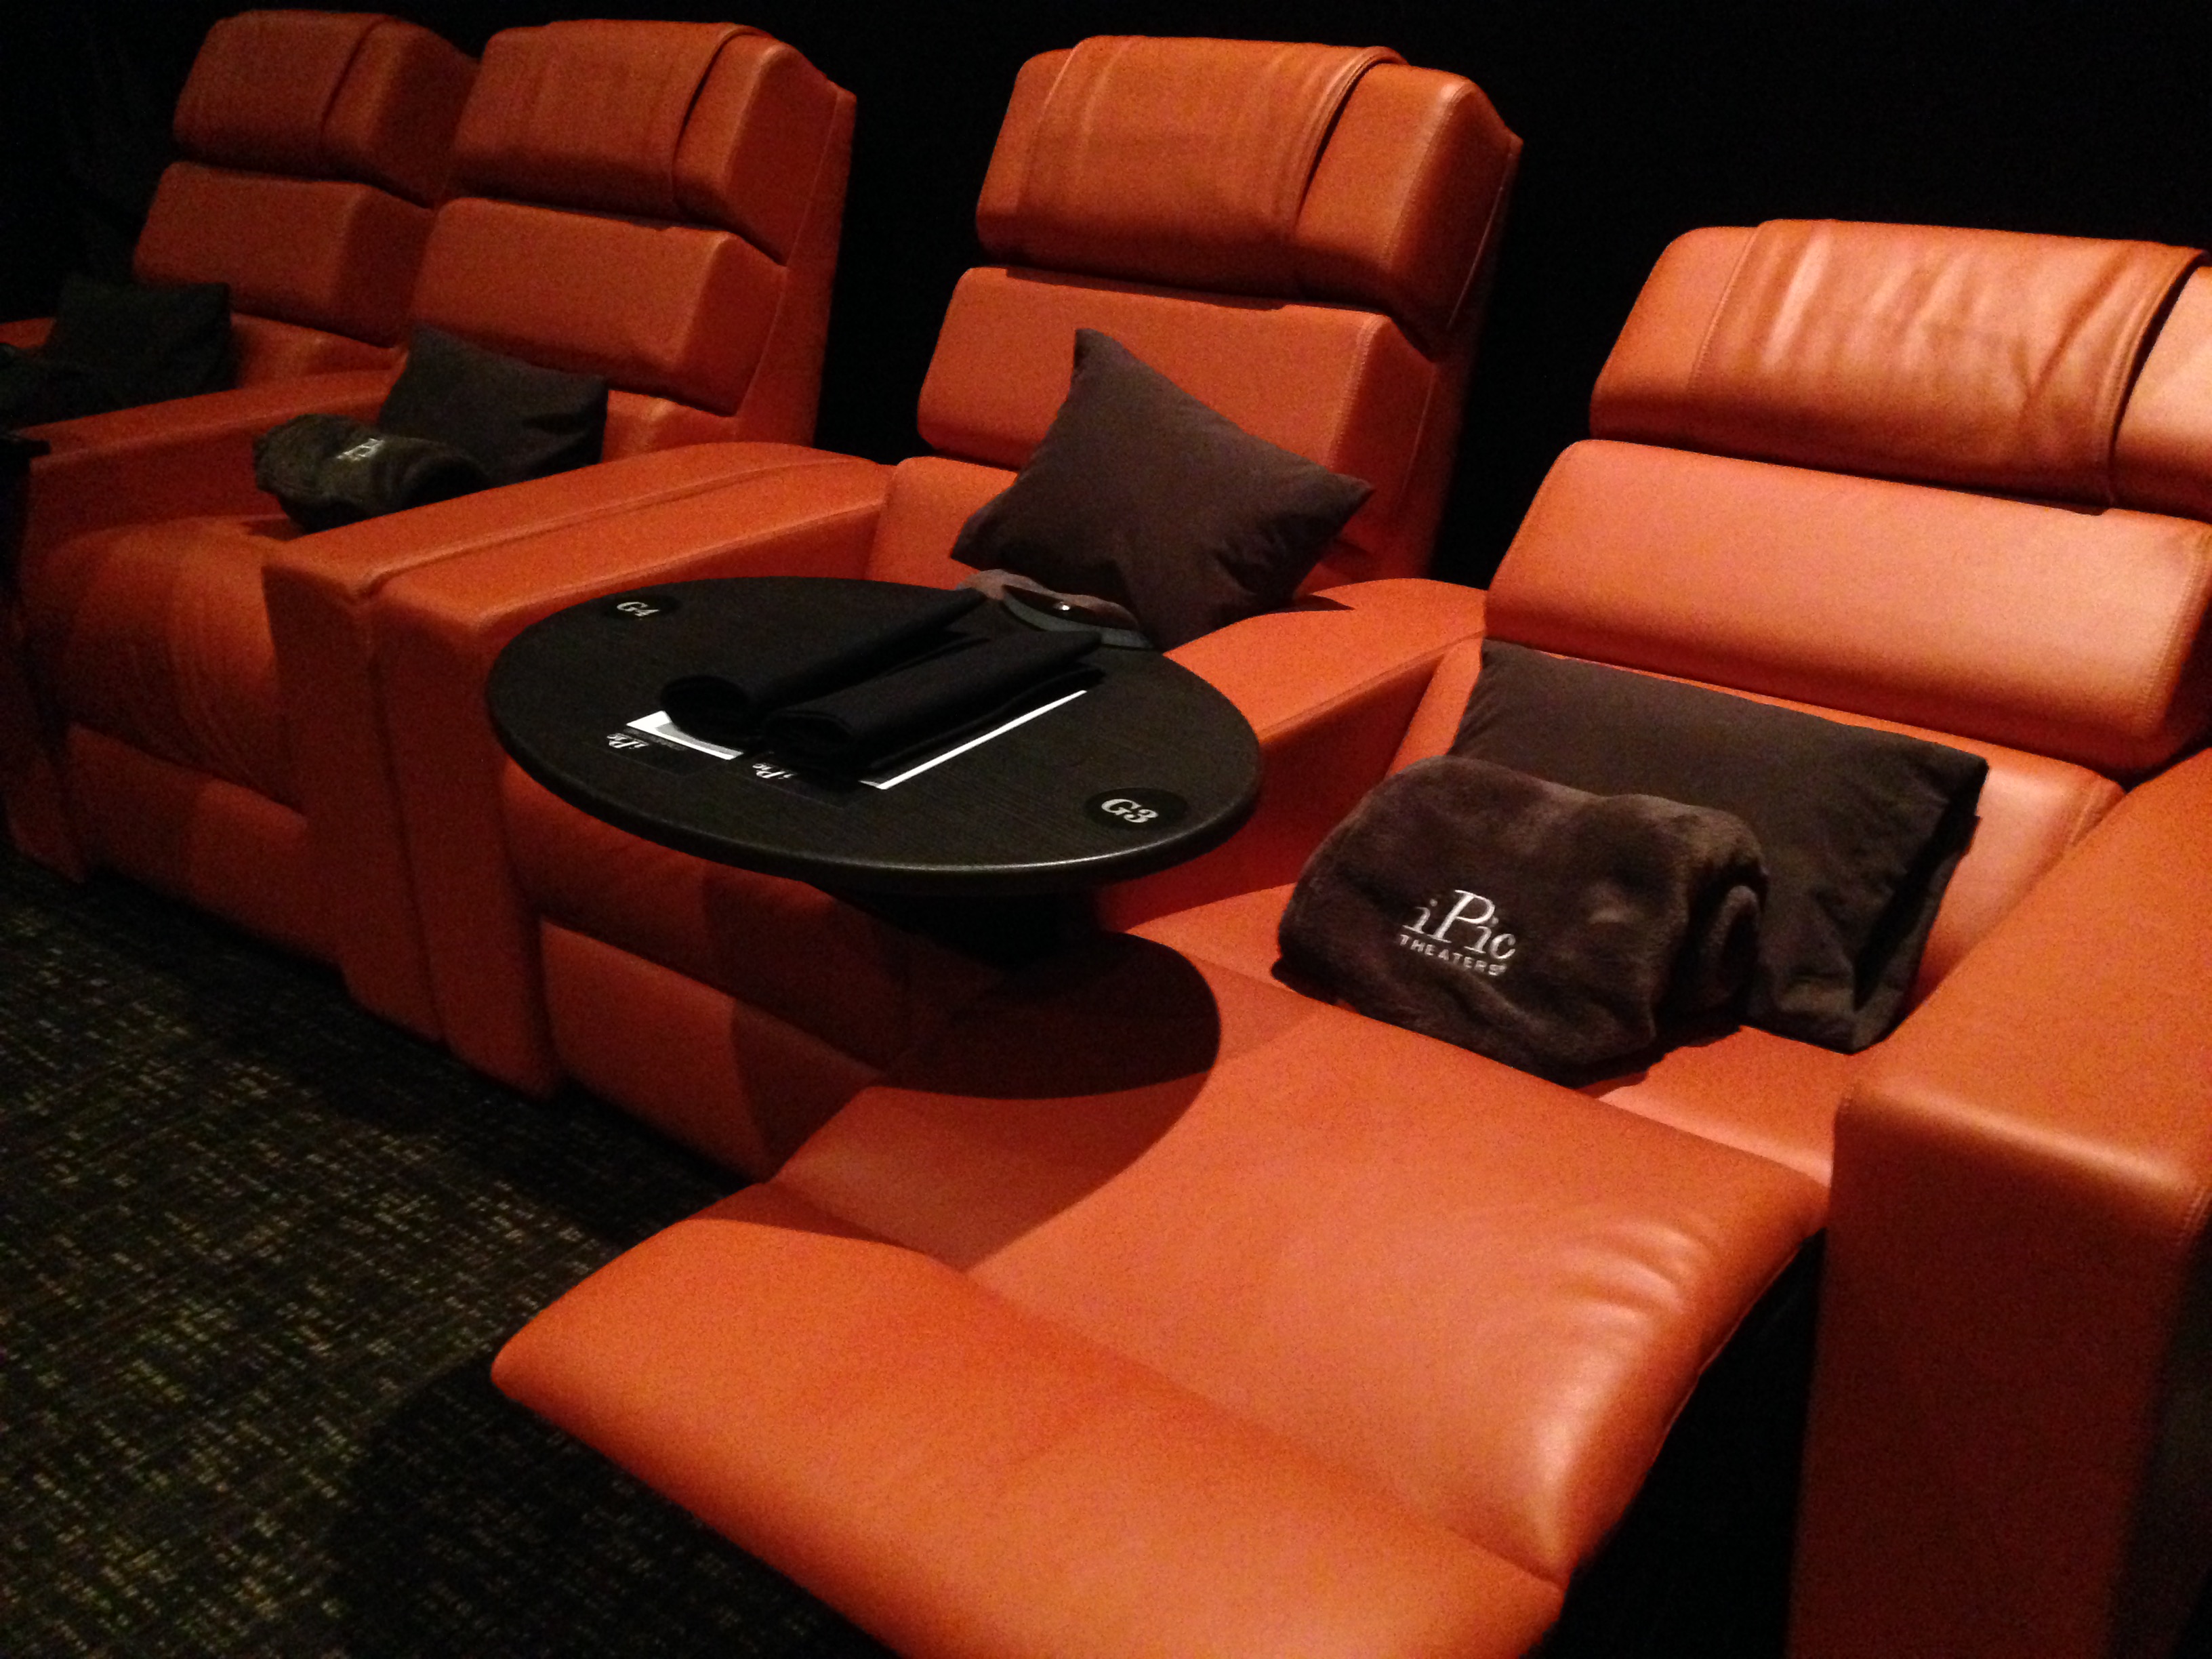 Second upscale movie theater debuts in Bethesda